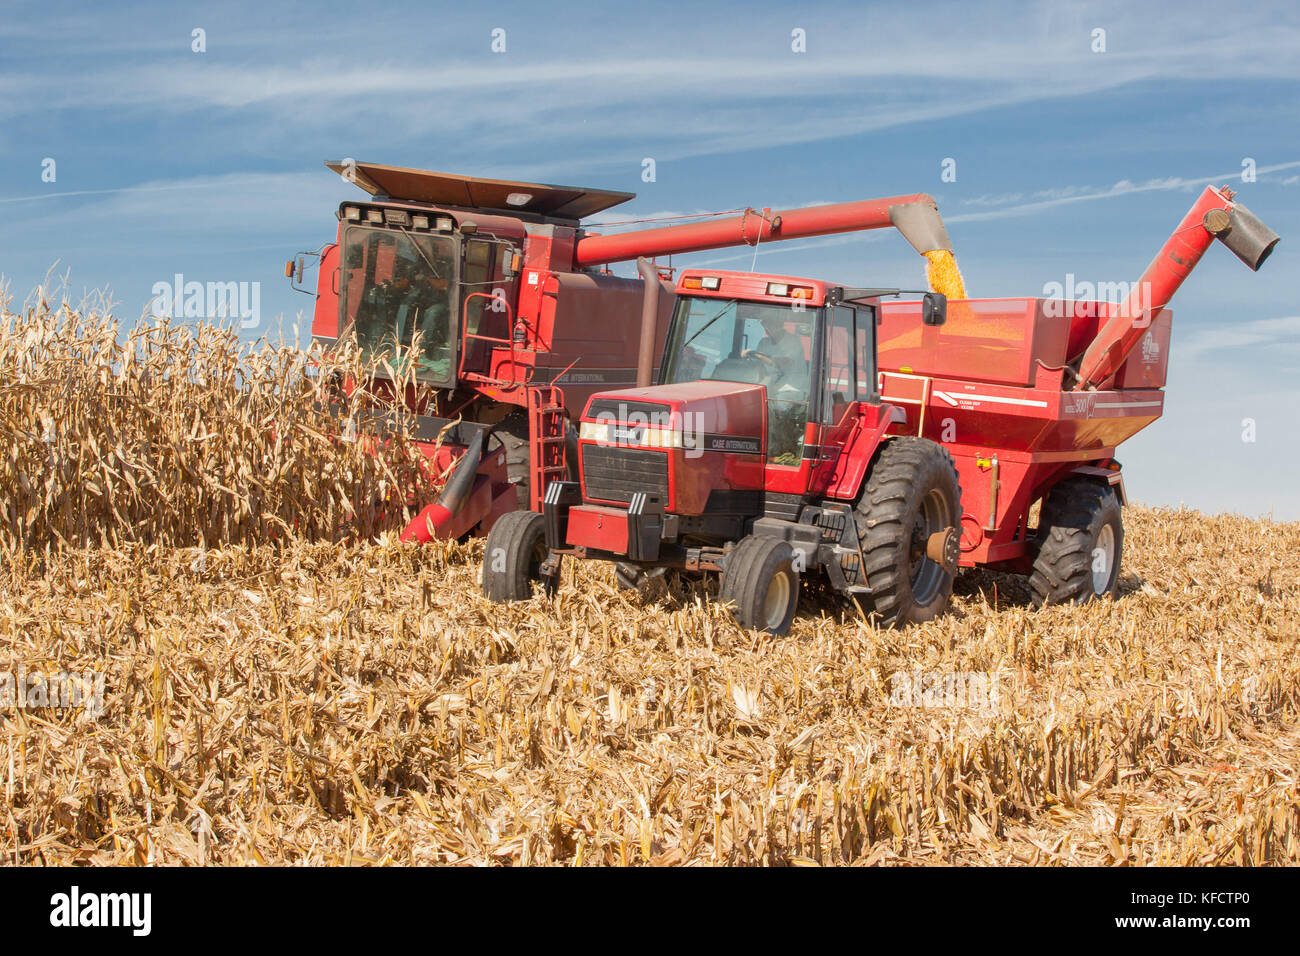 A combine harvesting corn simultaneously loads a grain cart pulled by a tractor on a sunny day on a hill. Stock Photo